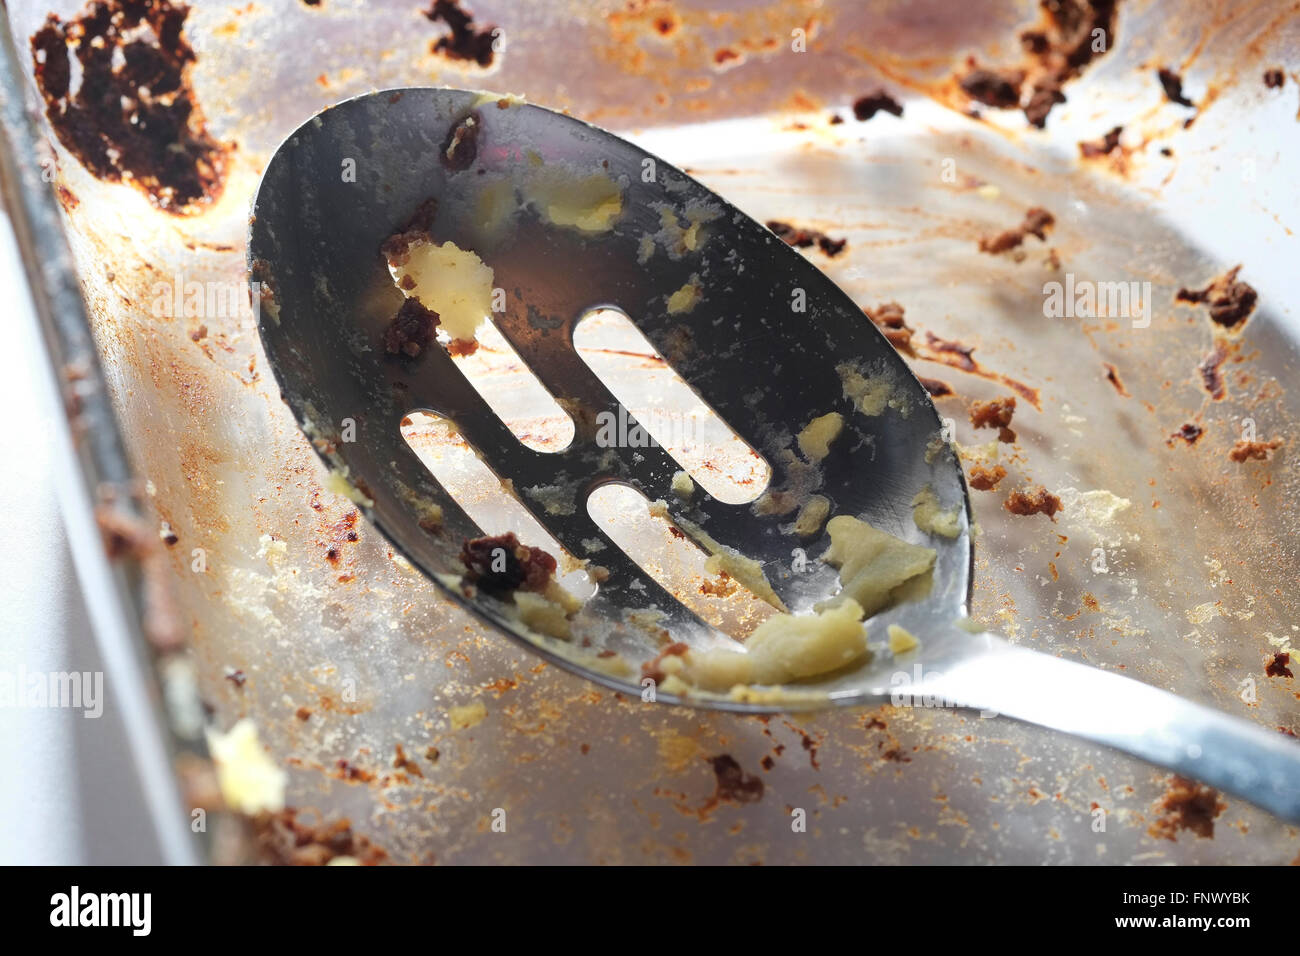 remains of shepherd pie in glass dish Stock Photo